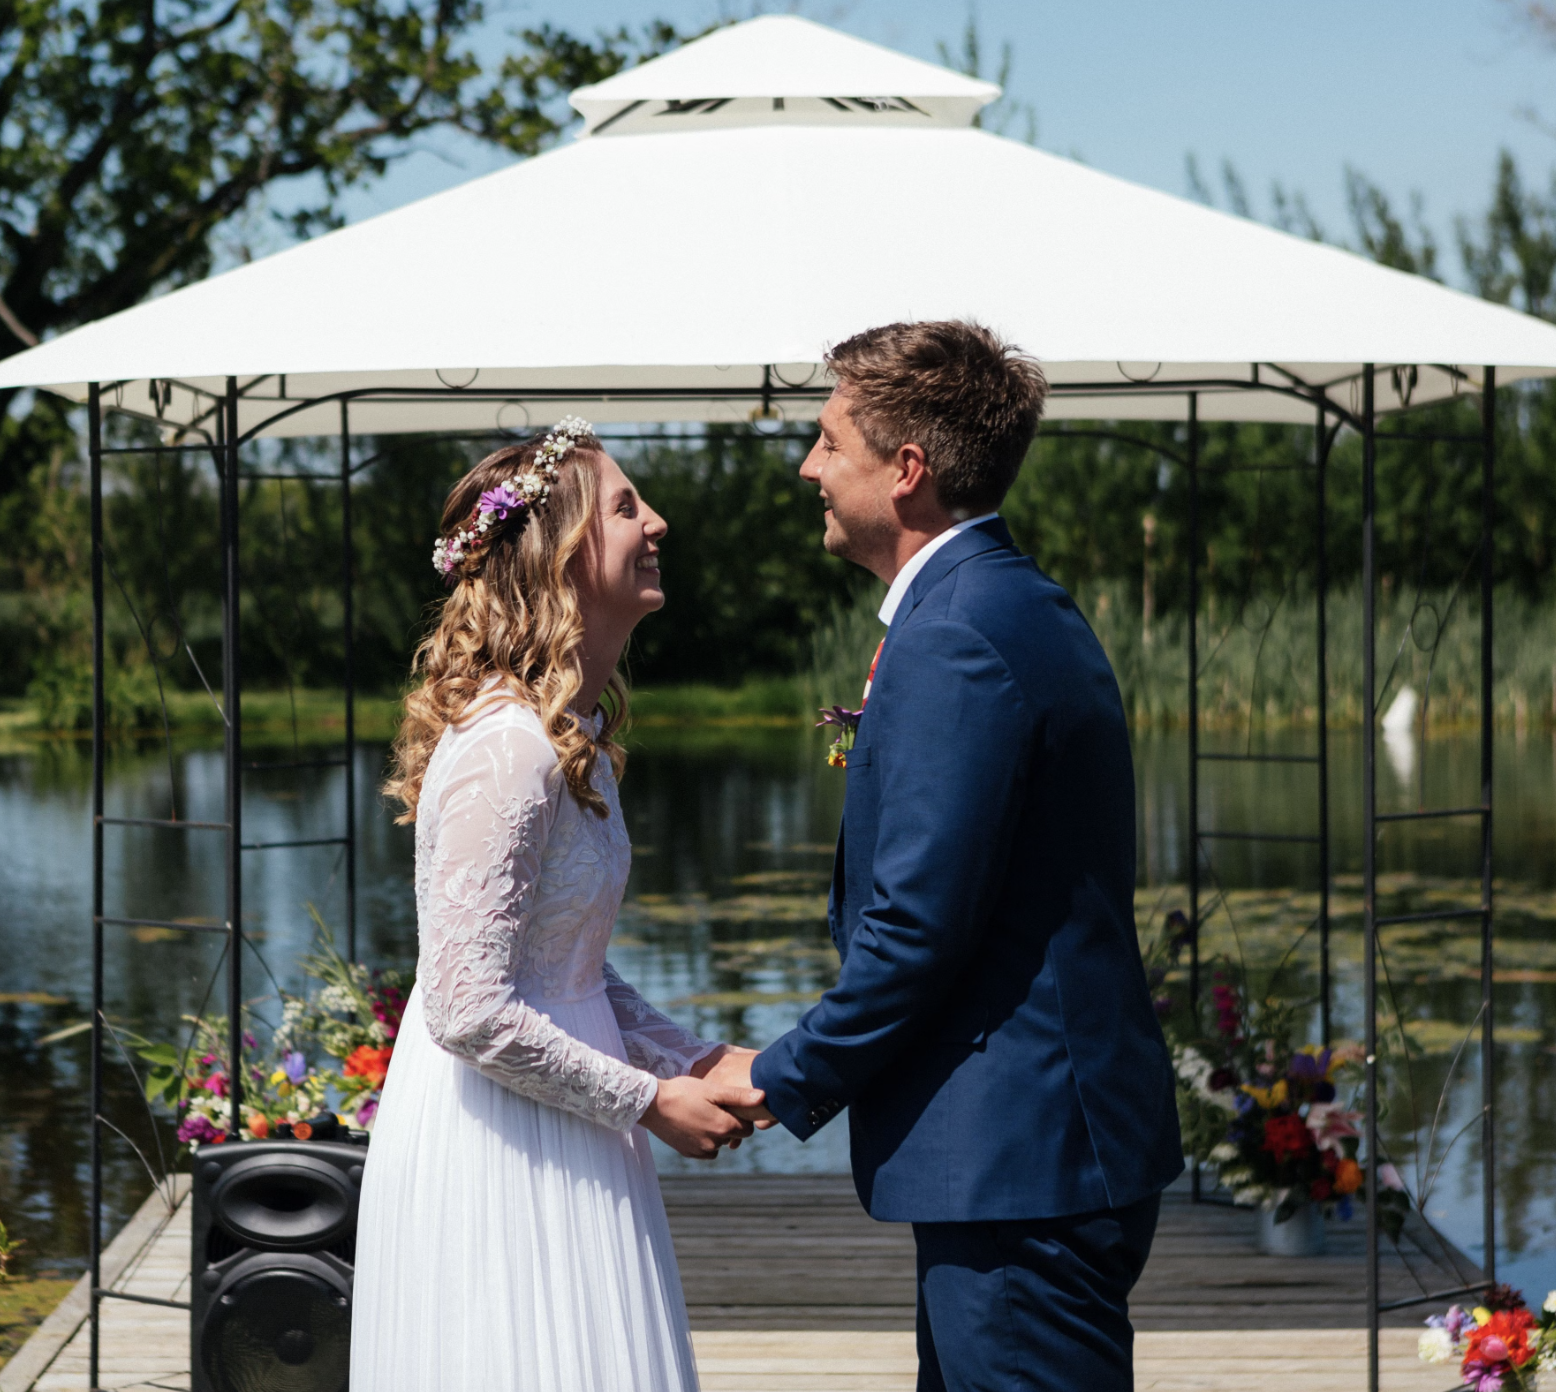 Lakeside marriage ceremony in Somerset, Waterside Country Barn